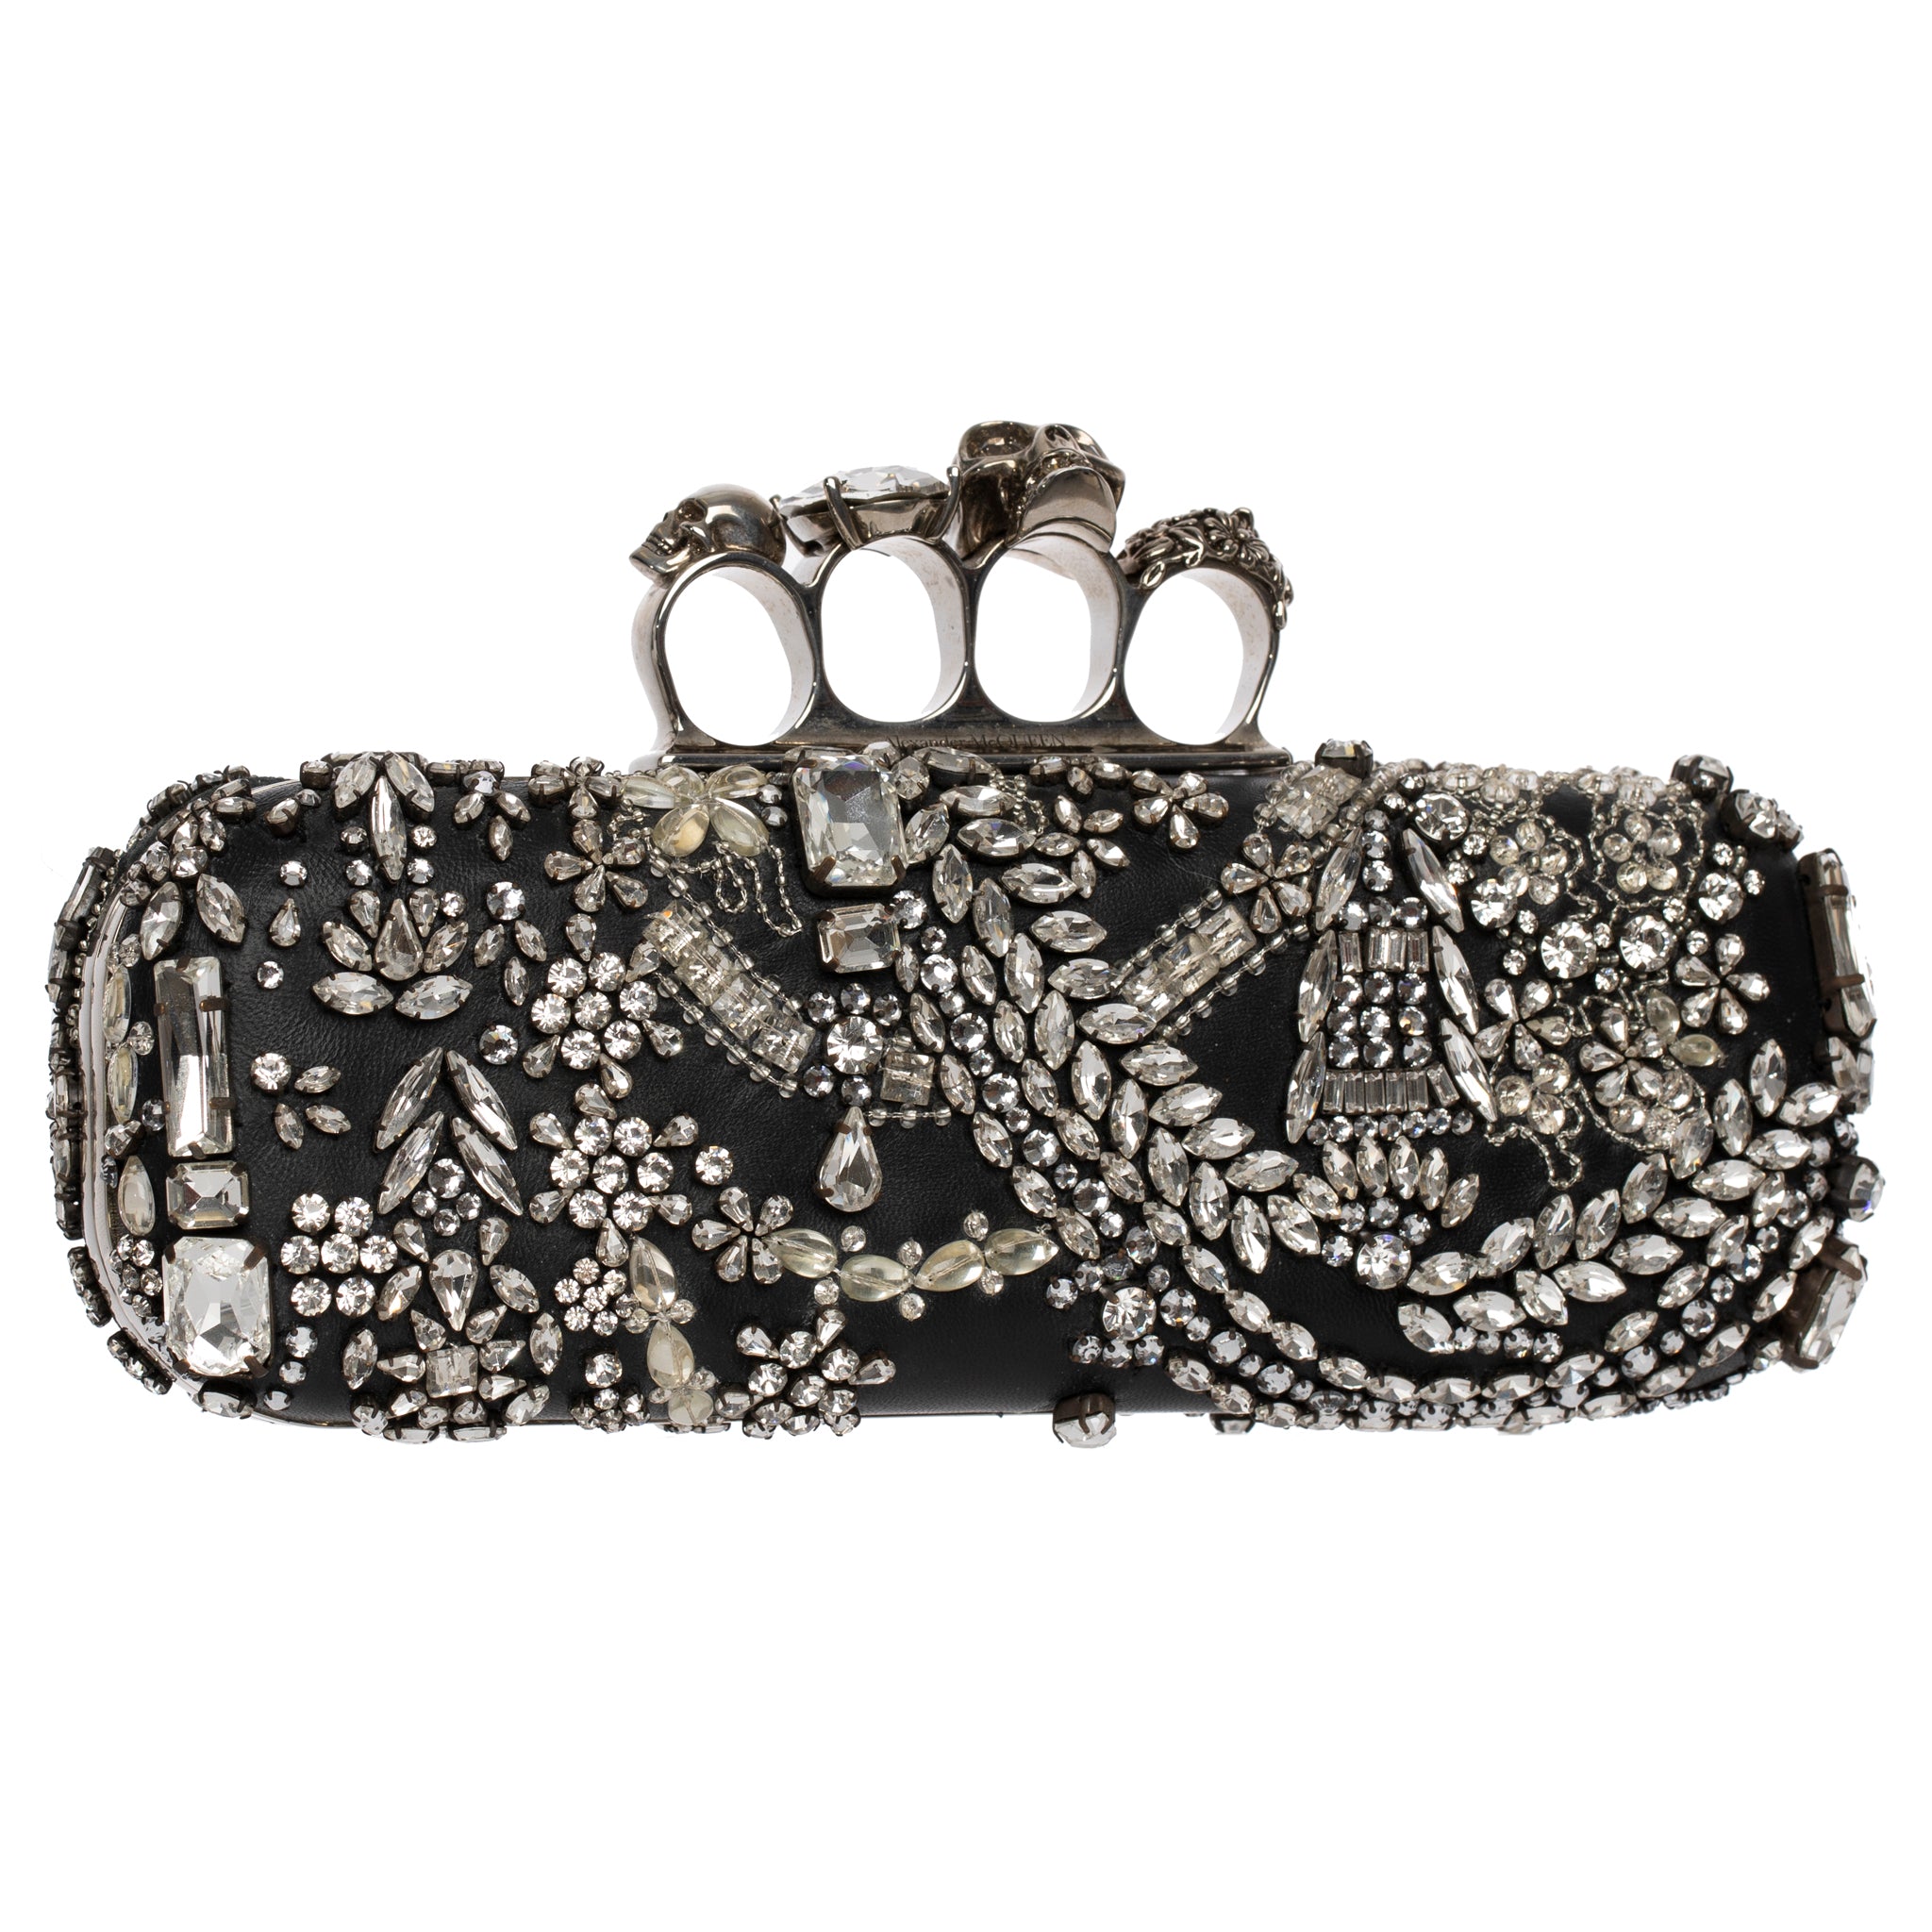 Alexander McQueen Knuckle Clutch in Black With Crystal Silver Tone Hardware